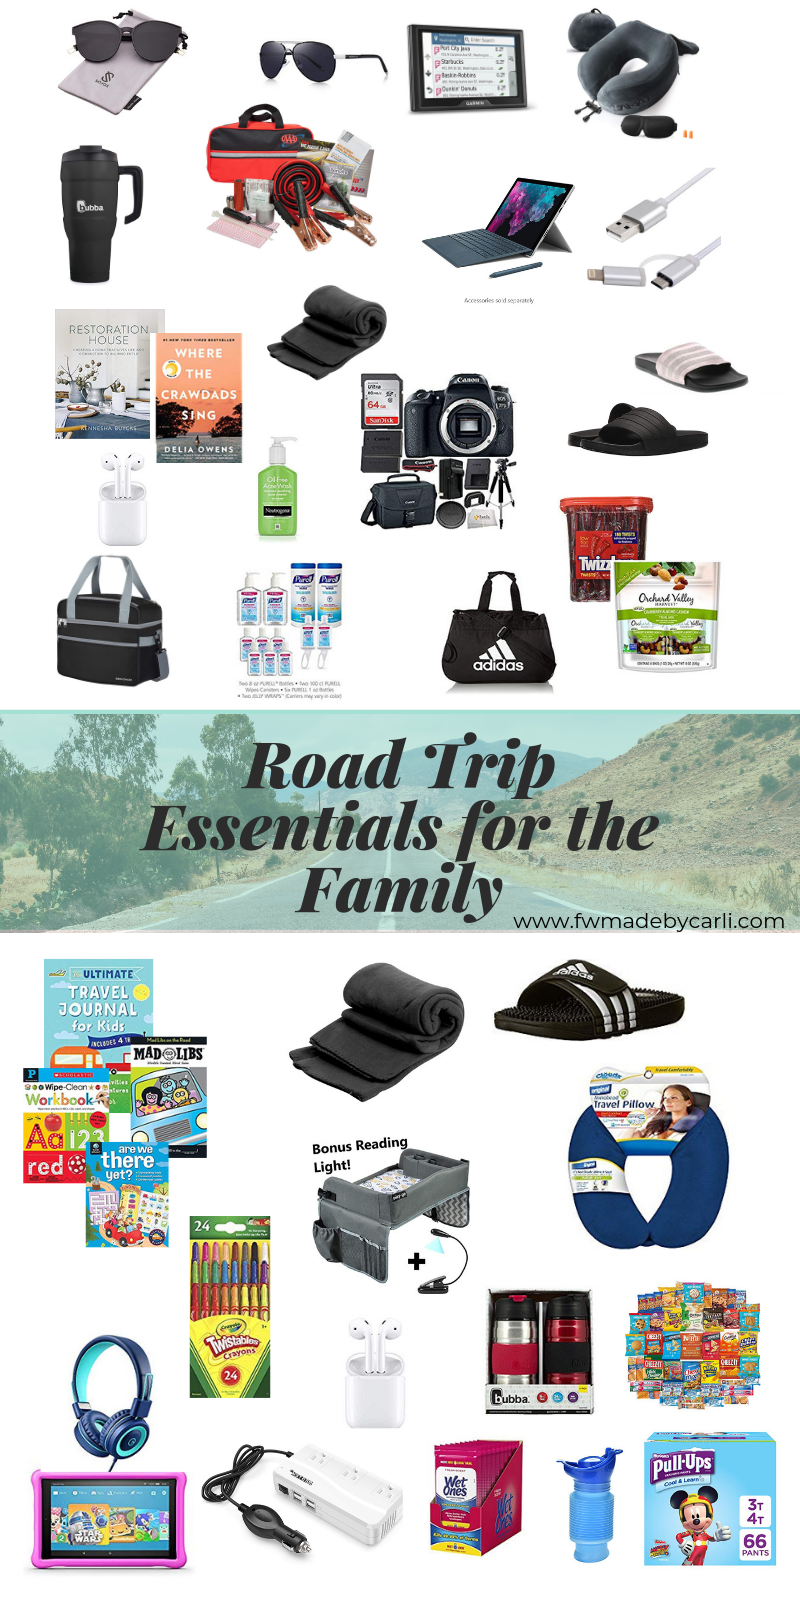 Road Trip Essentials for the Family - Made by Carli